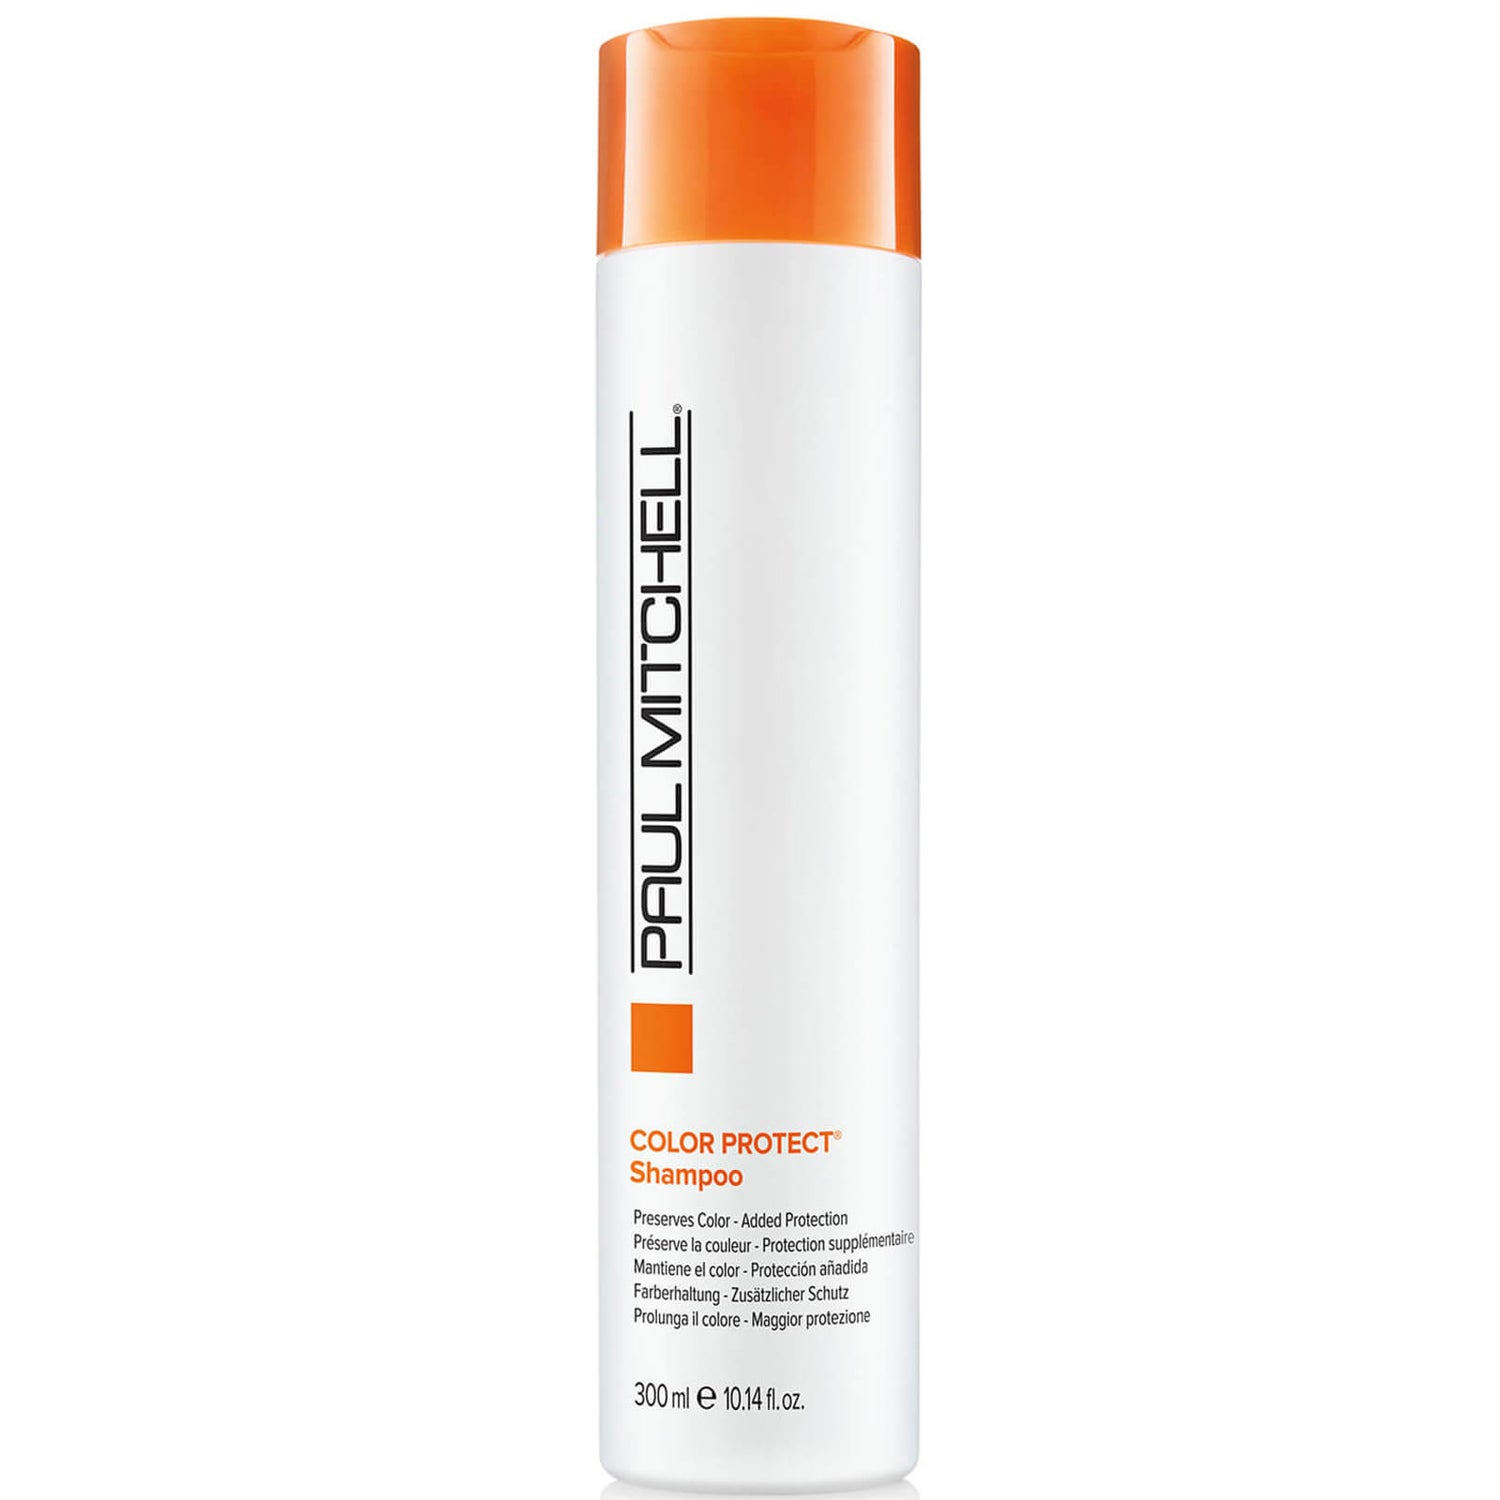 Paul Mitchell Color Protect Daily Shampoo (300ml)